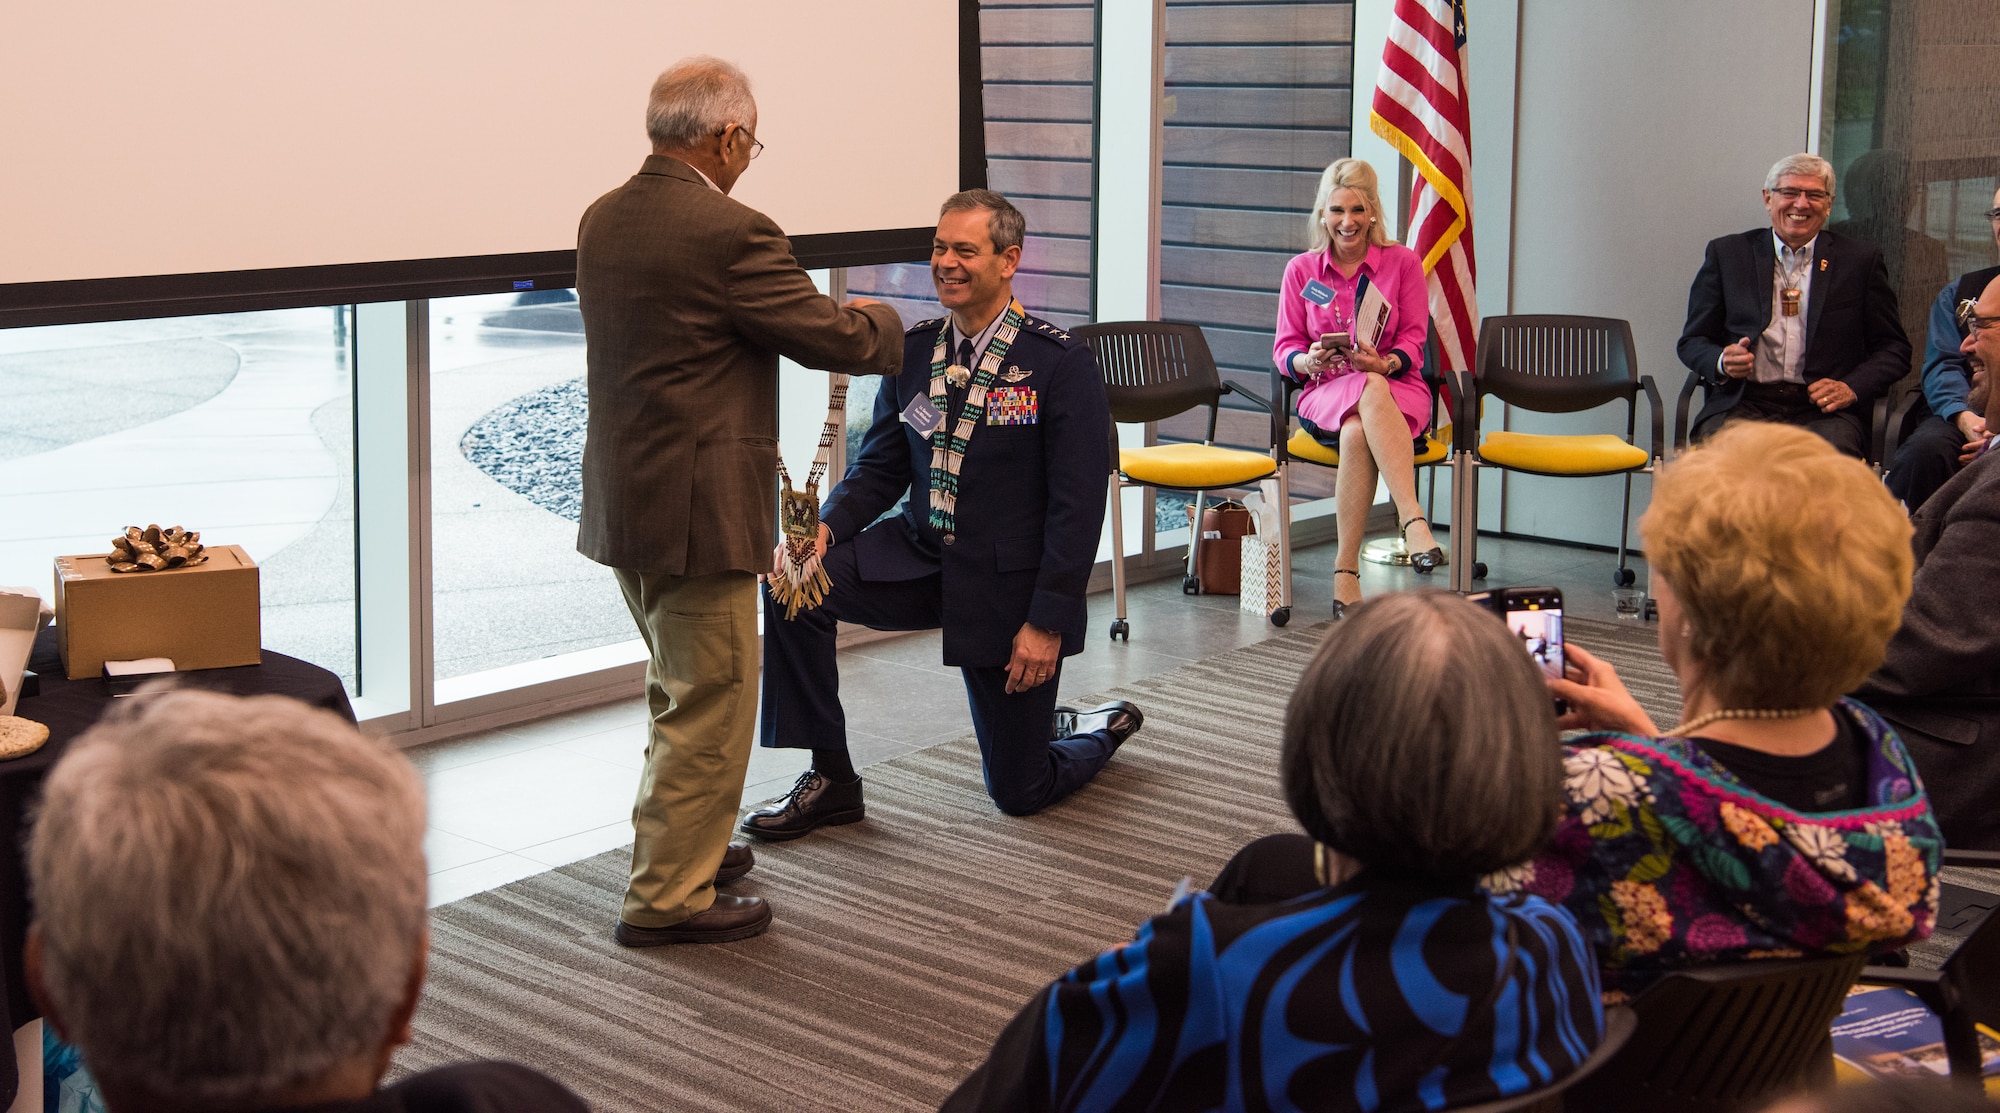 Emil Notti, Alaskan Federation of Natives council member, presents a chief’s necklace to U.S. Air Force Lt. Gen. Ken Wilsbach, commander of Alaskan NORAD Region, Alaskan Command and Eleventh Air Force, during a Native Alaska naming ceremony at the Fireweed Convention Center in Anchorage, Alaska, Aug. 21, 2018. AFN hosted the unique event honoring Wilsbach for his service and involvement with Native Alaskan communities during his tenure in Alaska. It marked the first time in Alaska Native history a U.S. Armed forces general officer was given multiple Native names.